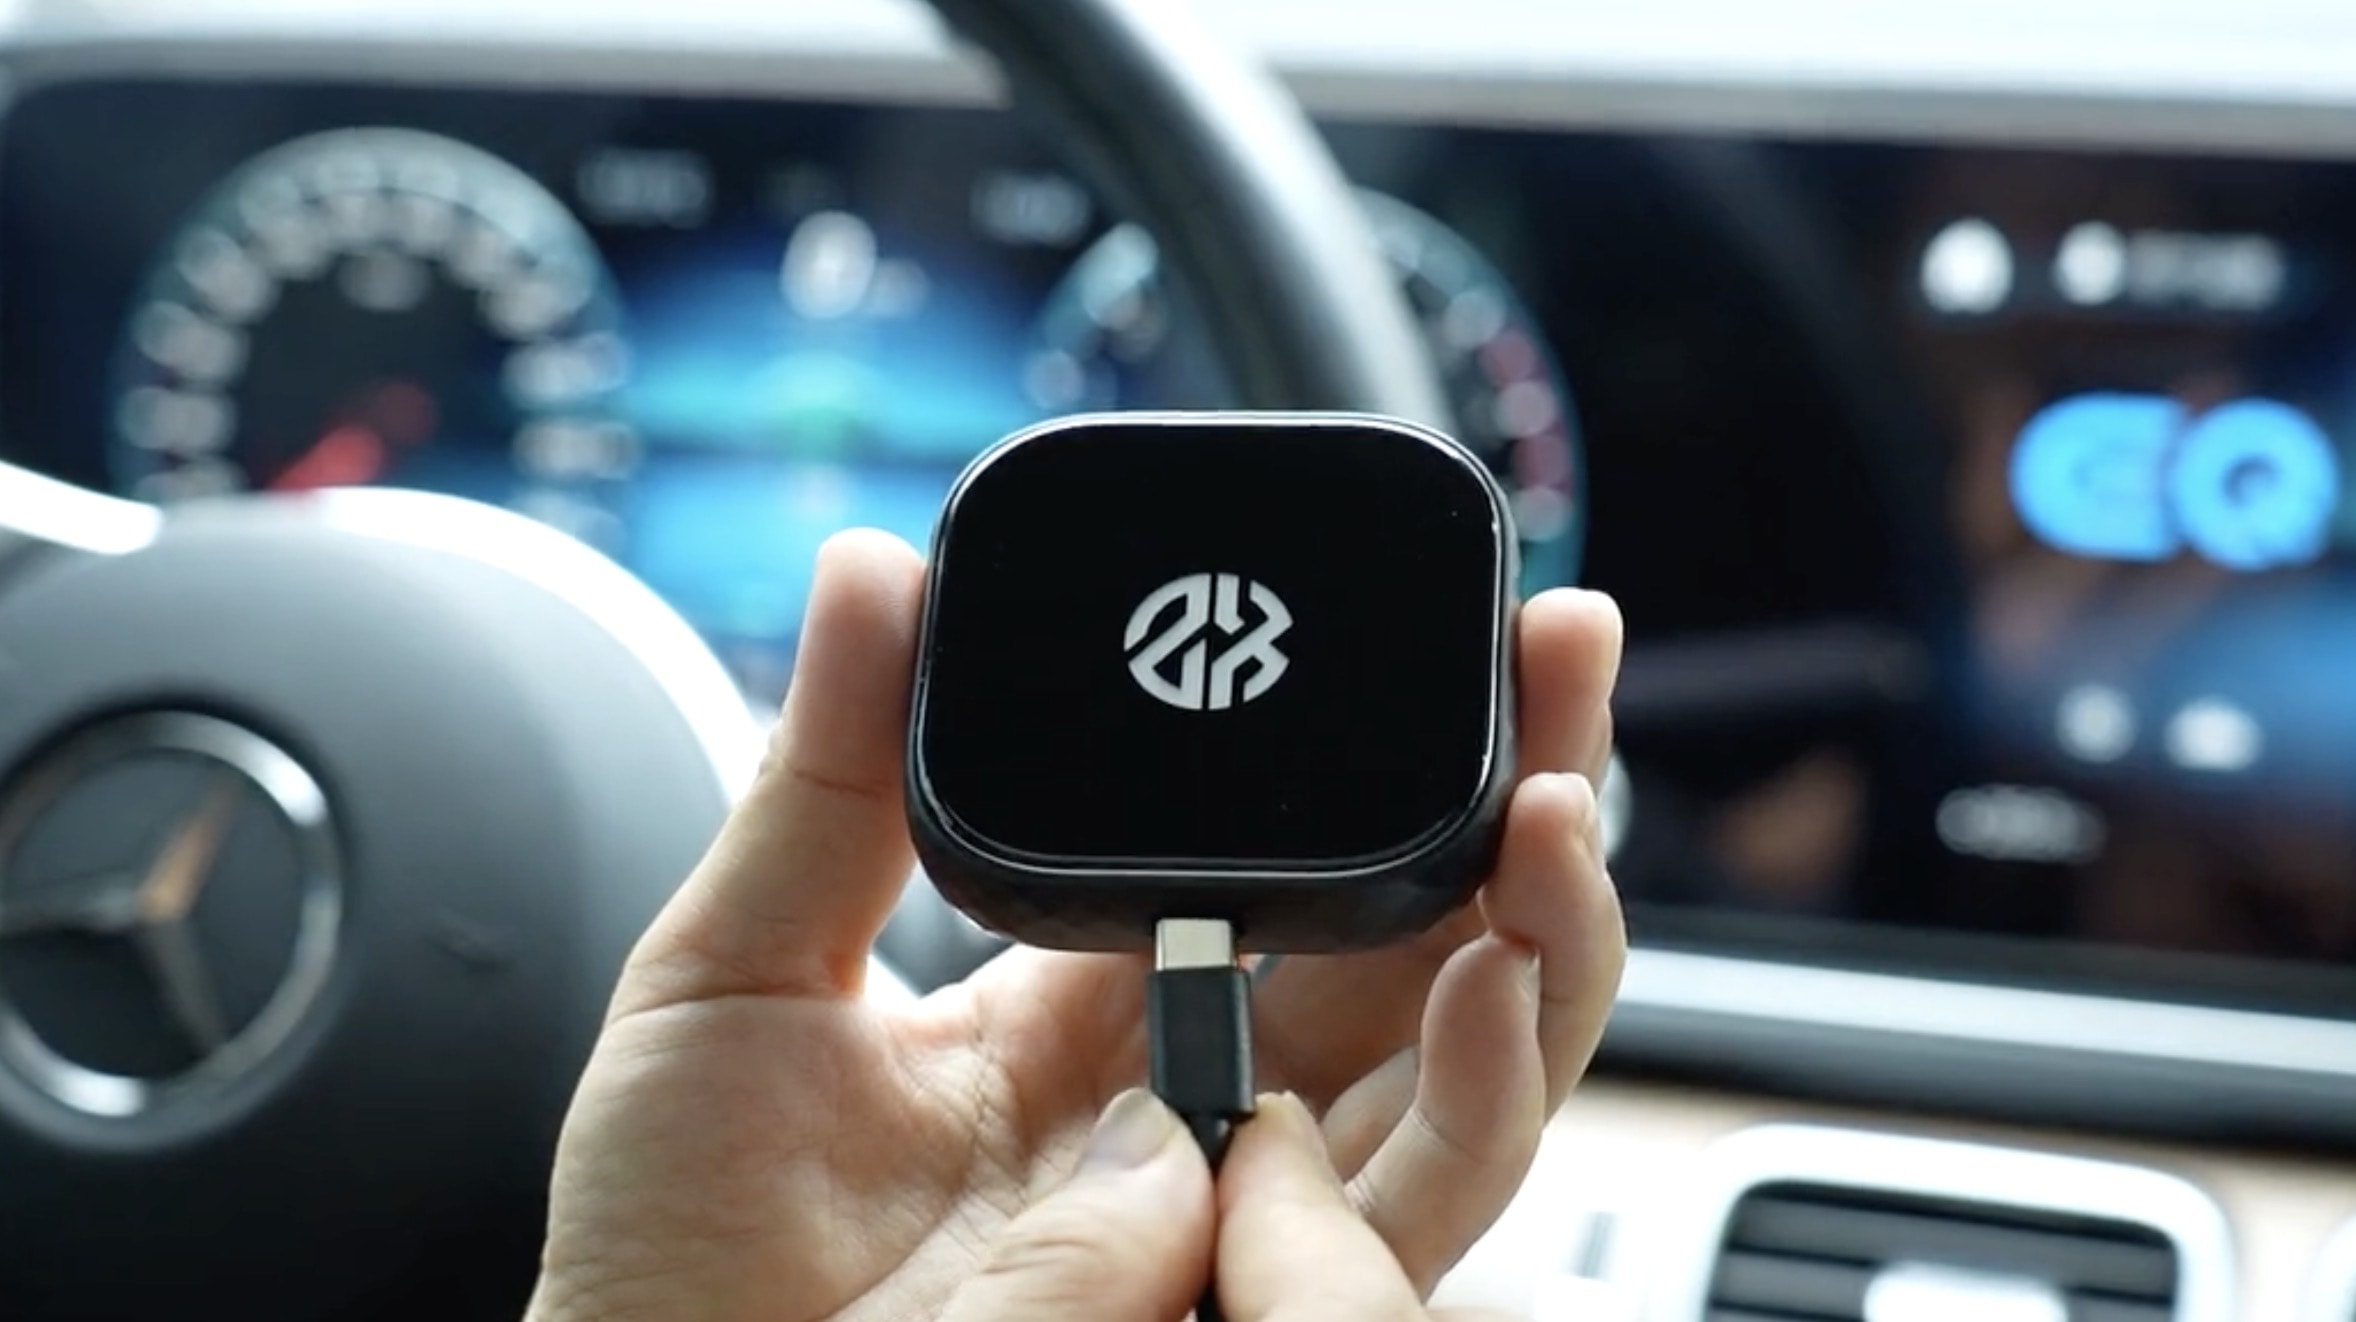 https://s1.cdn.autoevolution.com/images/news/new-device-promises-to-convert-wired-carplay-to-wireless-225863_1.jpg